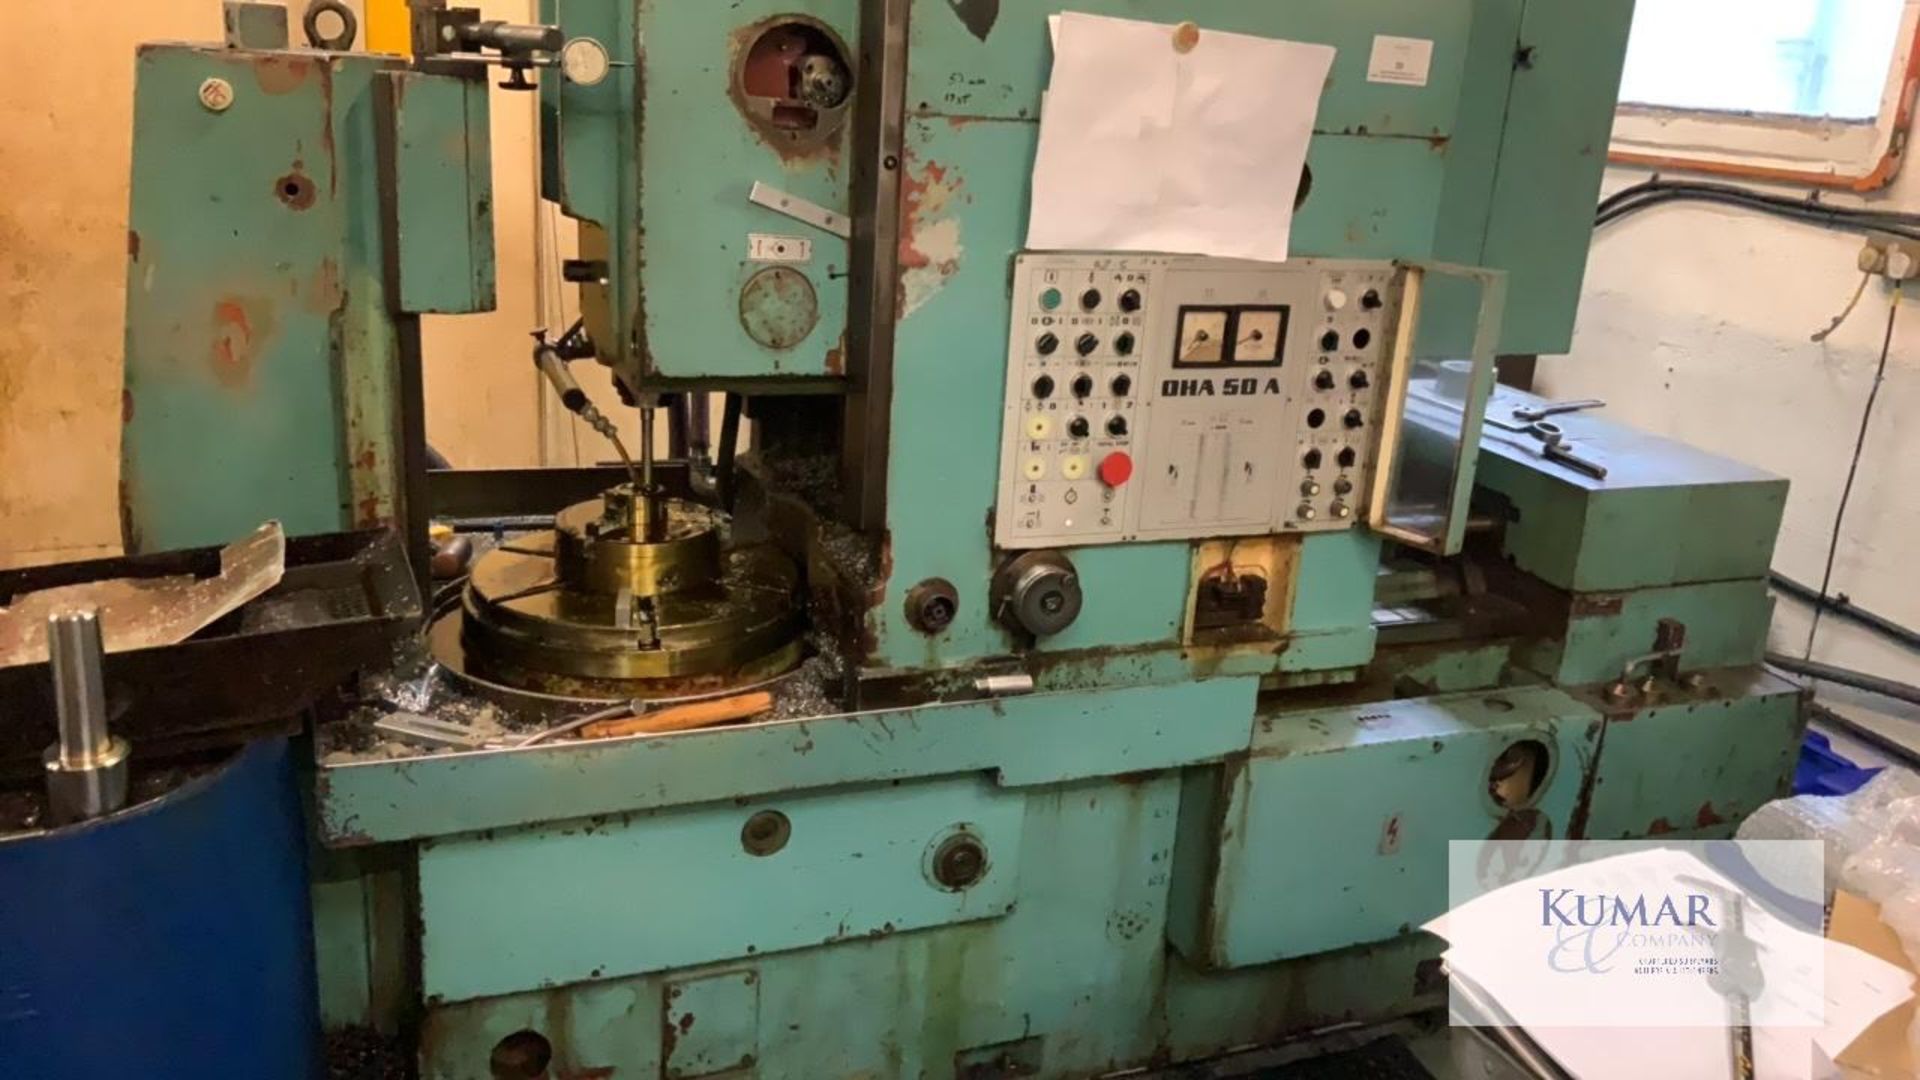 Tos Model No OHA 50 A Gear shaping machine with change gears - Collection Date Thursday 3rd March - Image 2 of 11